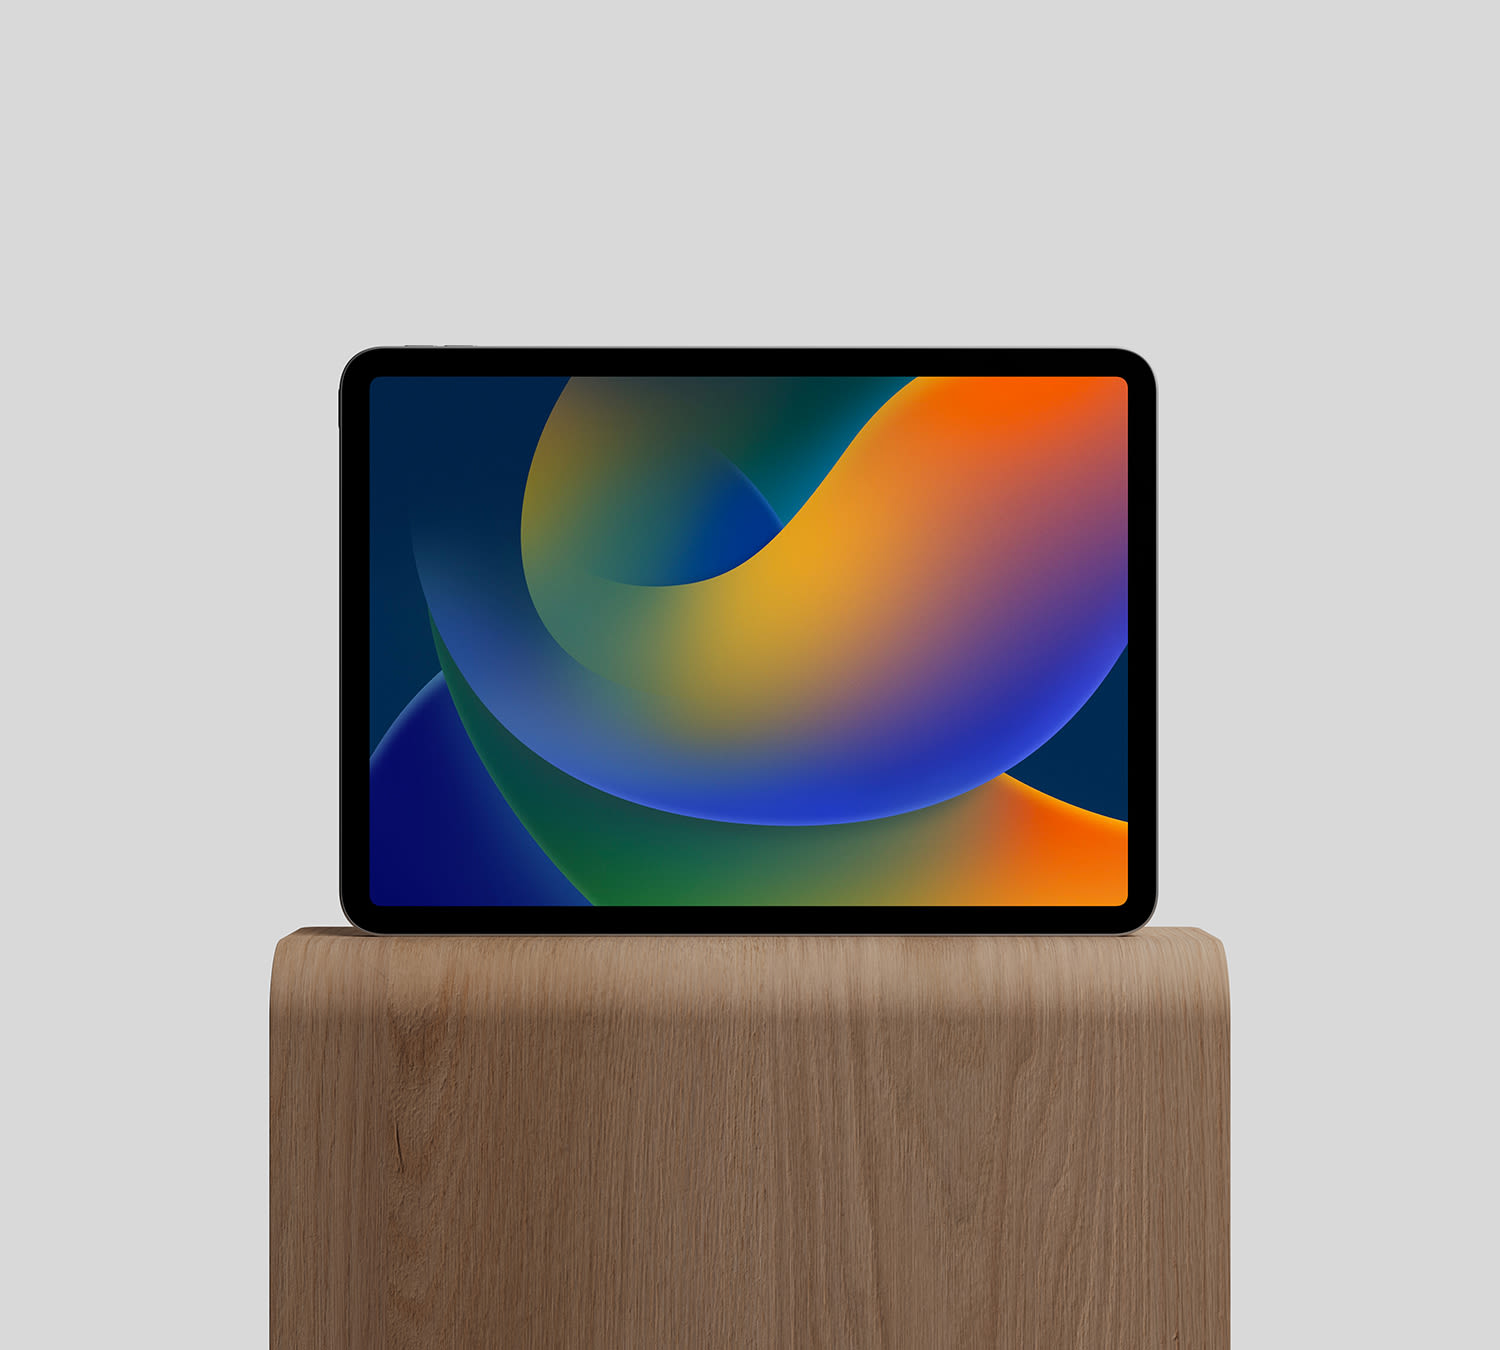 M2 iPad Pro on Wood Stand Mockup by Anthony Boyd Graphics